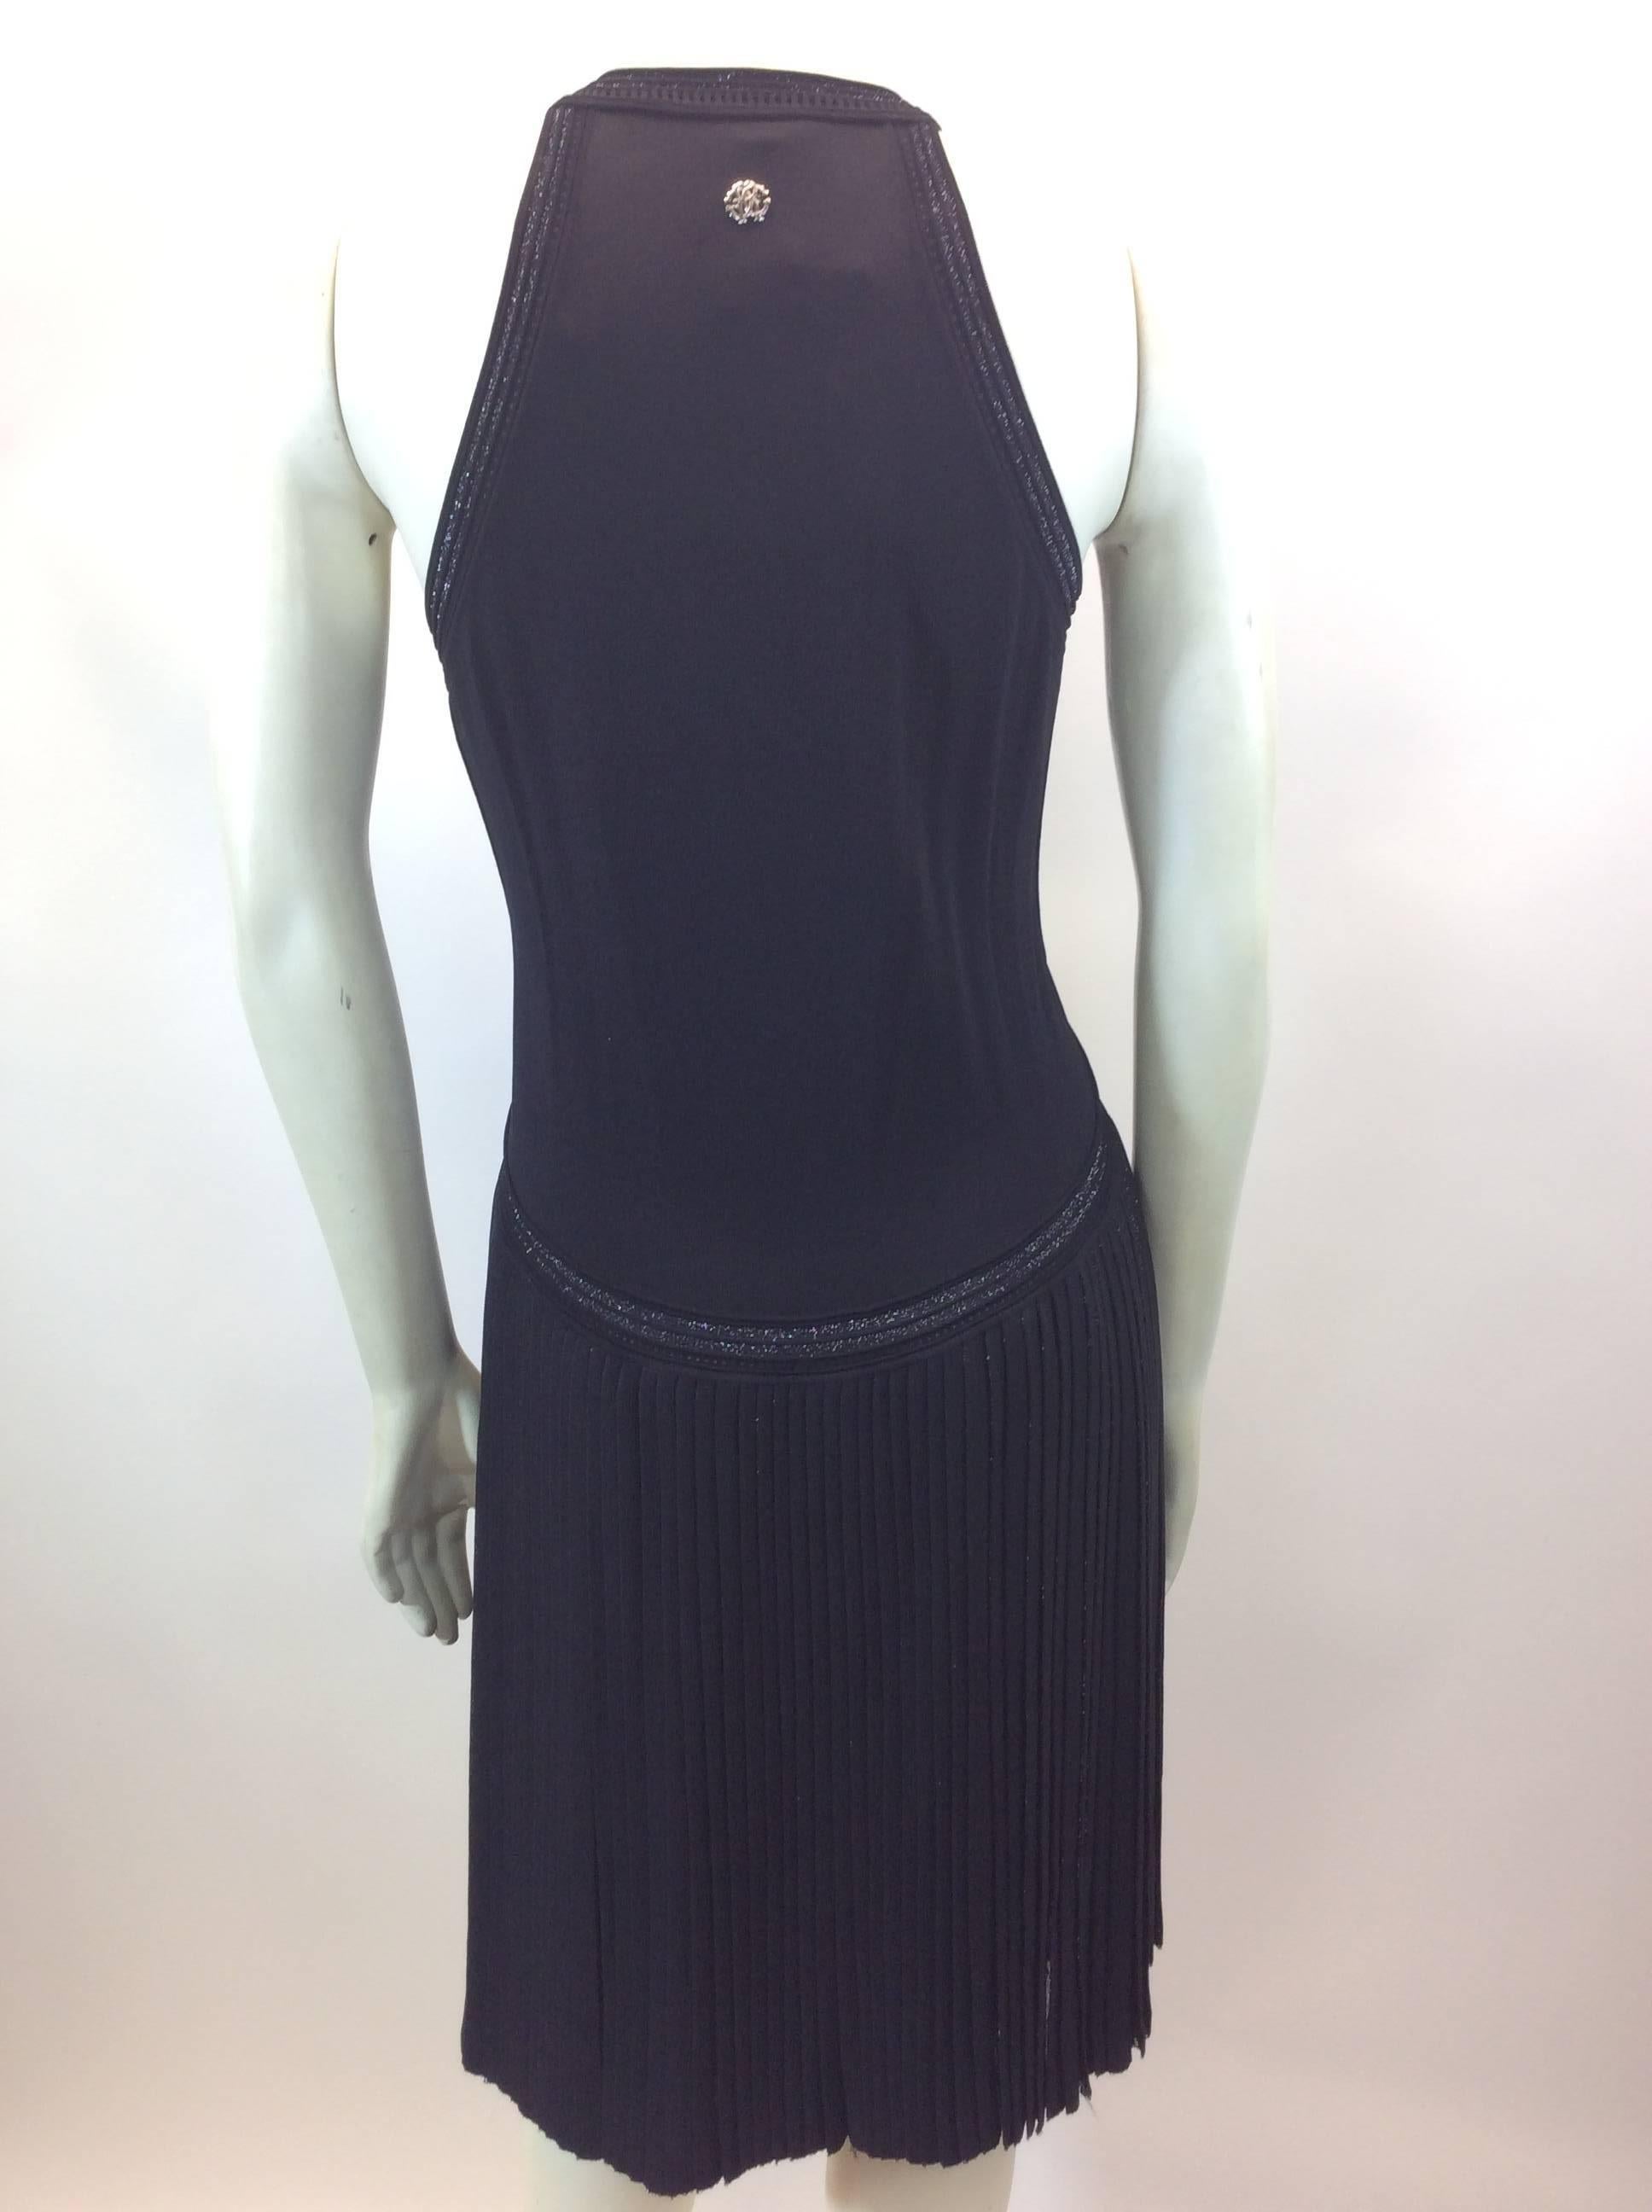 Robert Cavalli Black Formal Dress In Excellent Condition For Sale In Narberth, PA